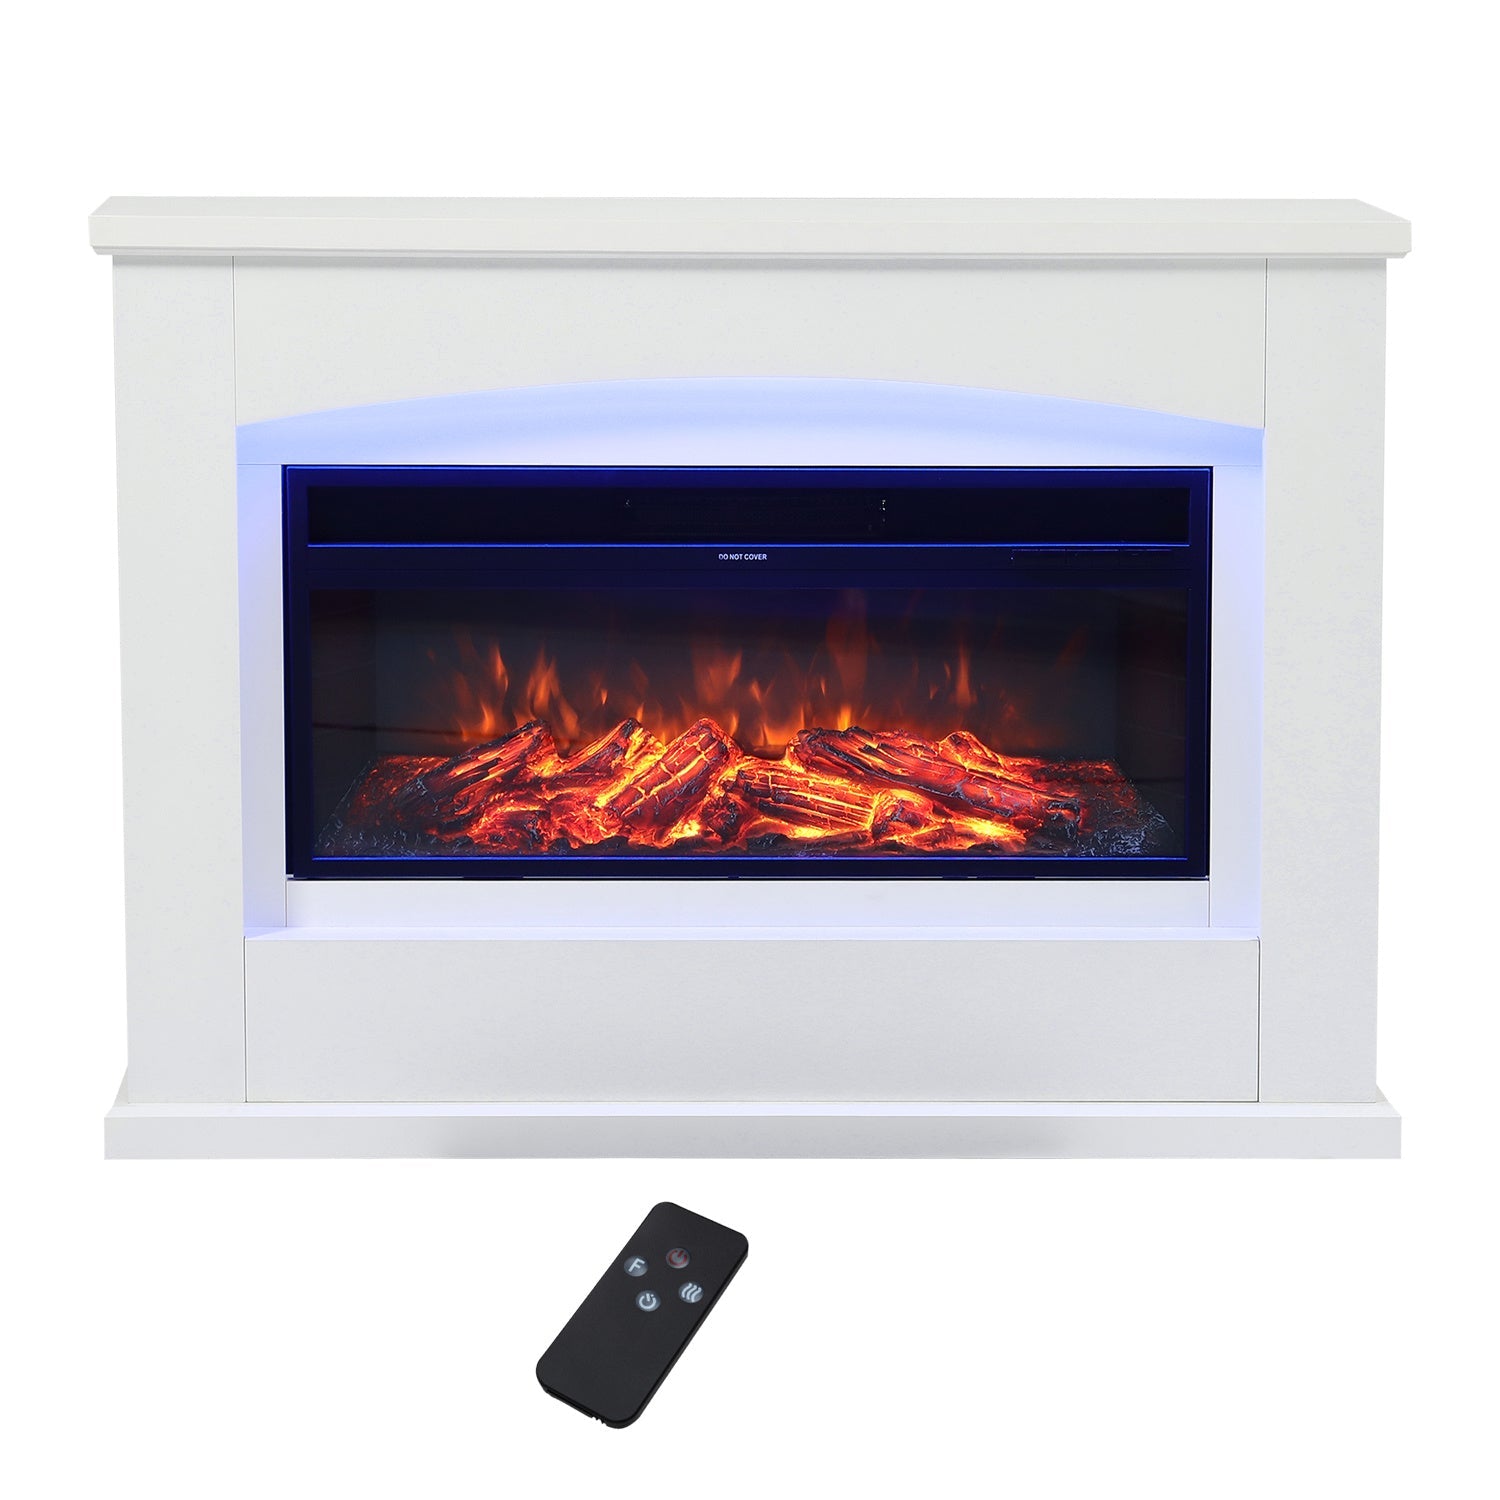 34 Inch Electric Fireplace Suite Temperature Adjustment Room Heater 1800W Fireplaces Living and Home 